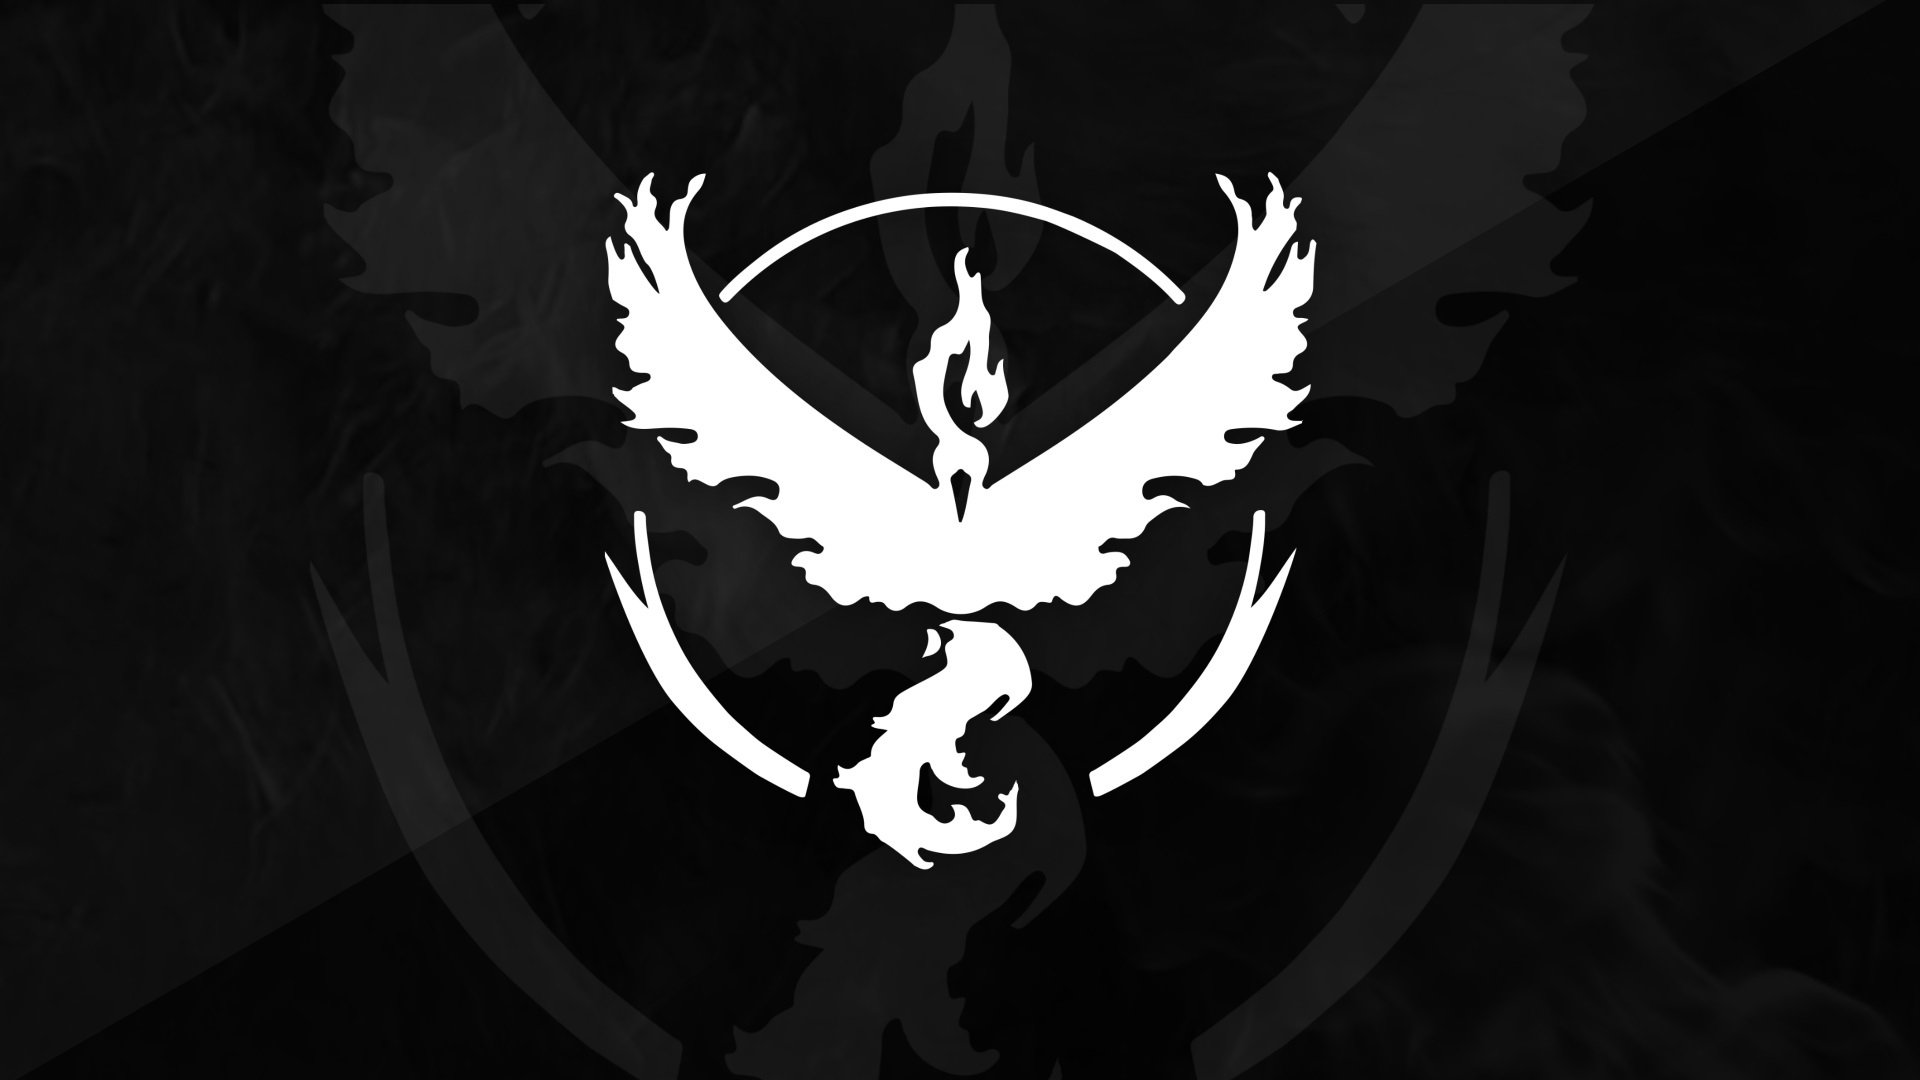 Team Valor In Black And White Hd Wallpaper Background Image 19x1080